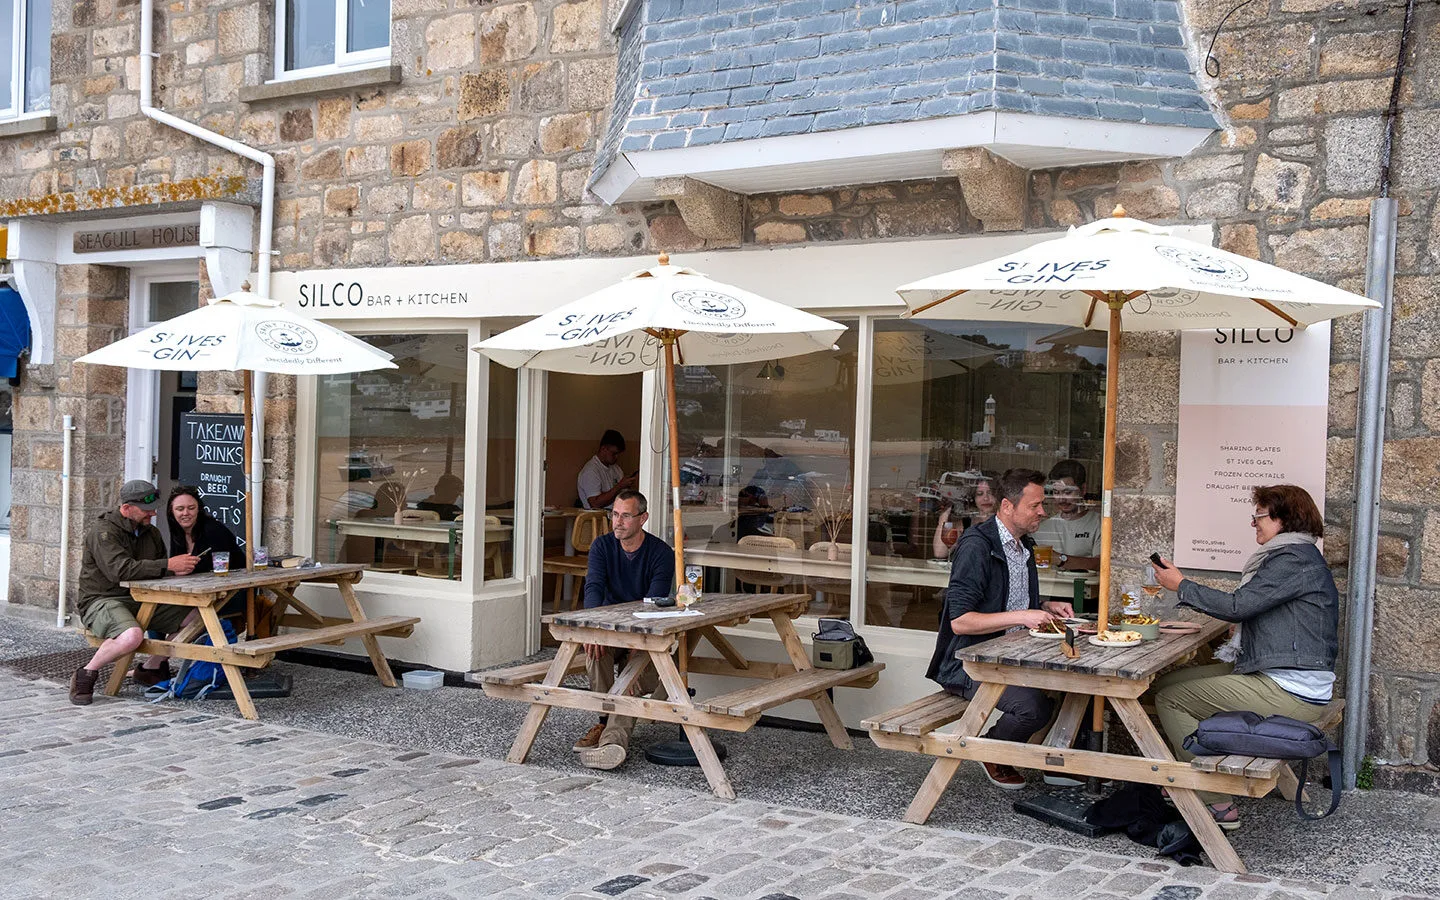 Silco Bar & Kitchen in St Ives harbour